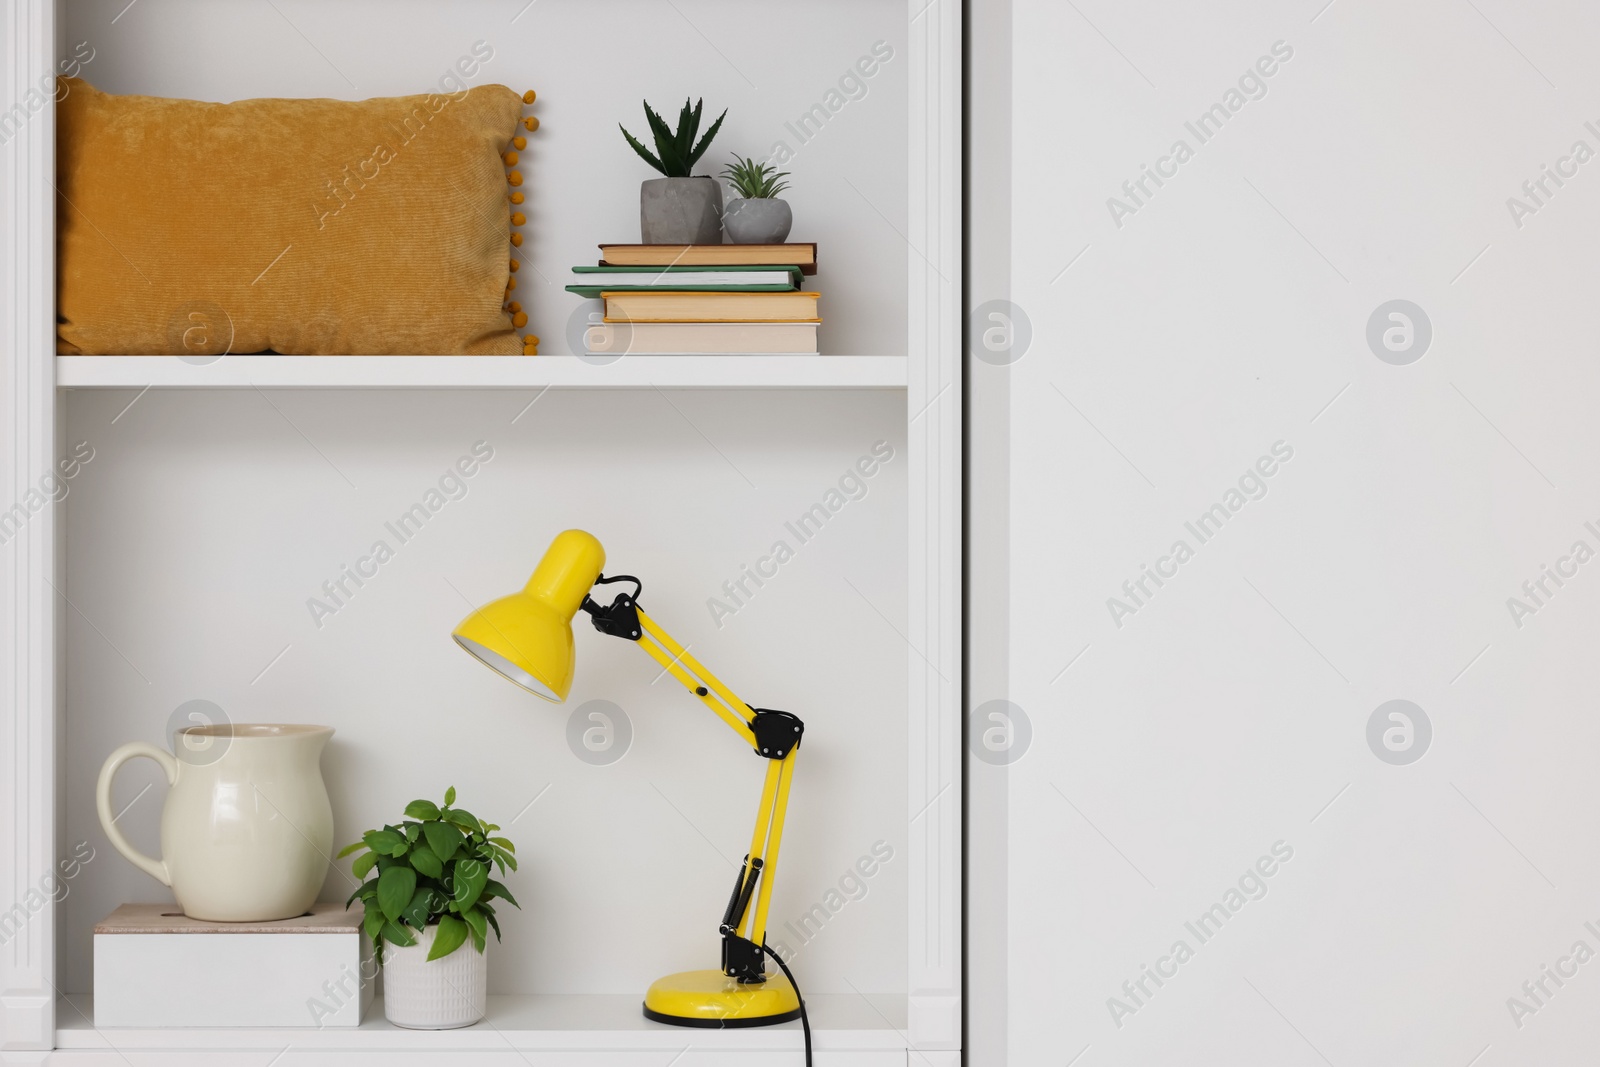 Photo of Shelves with lamp, books and different decor indoors, space for text. Interior design